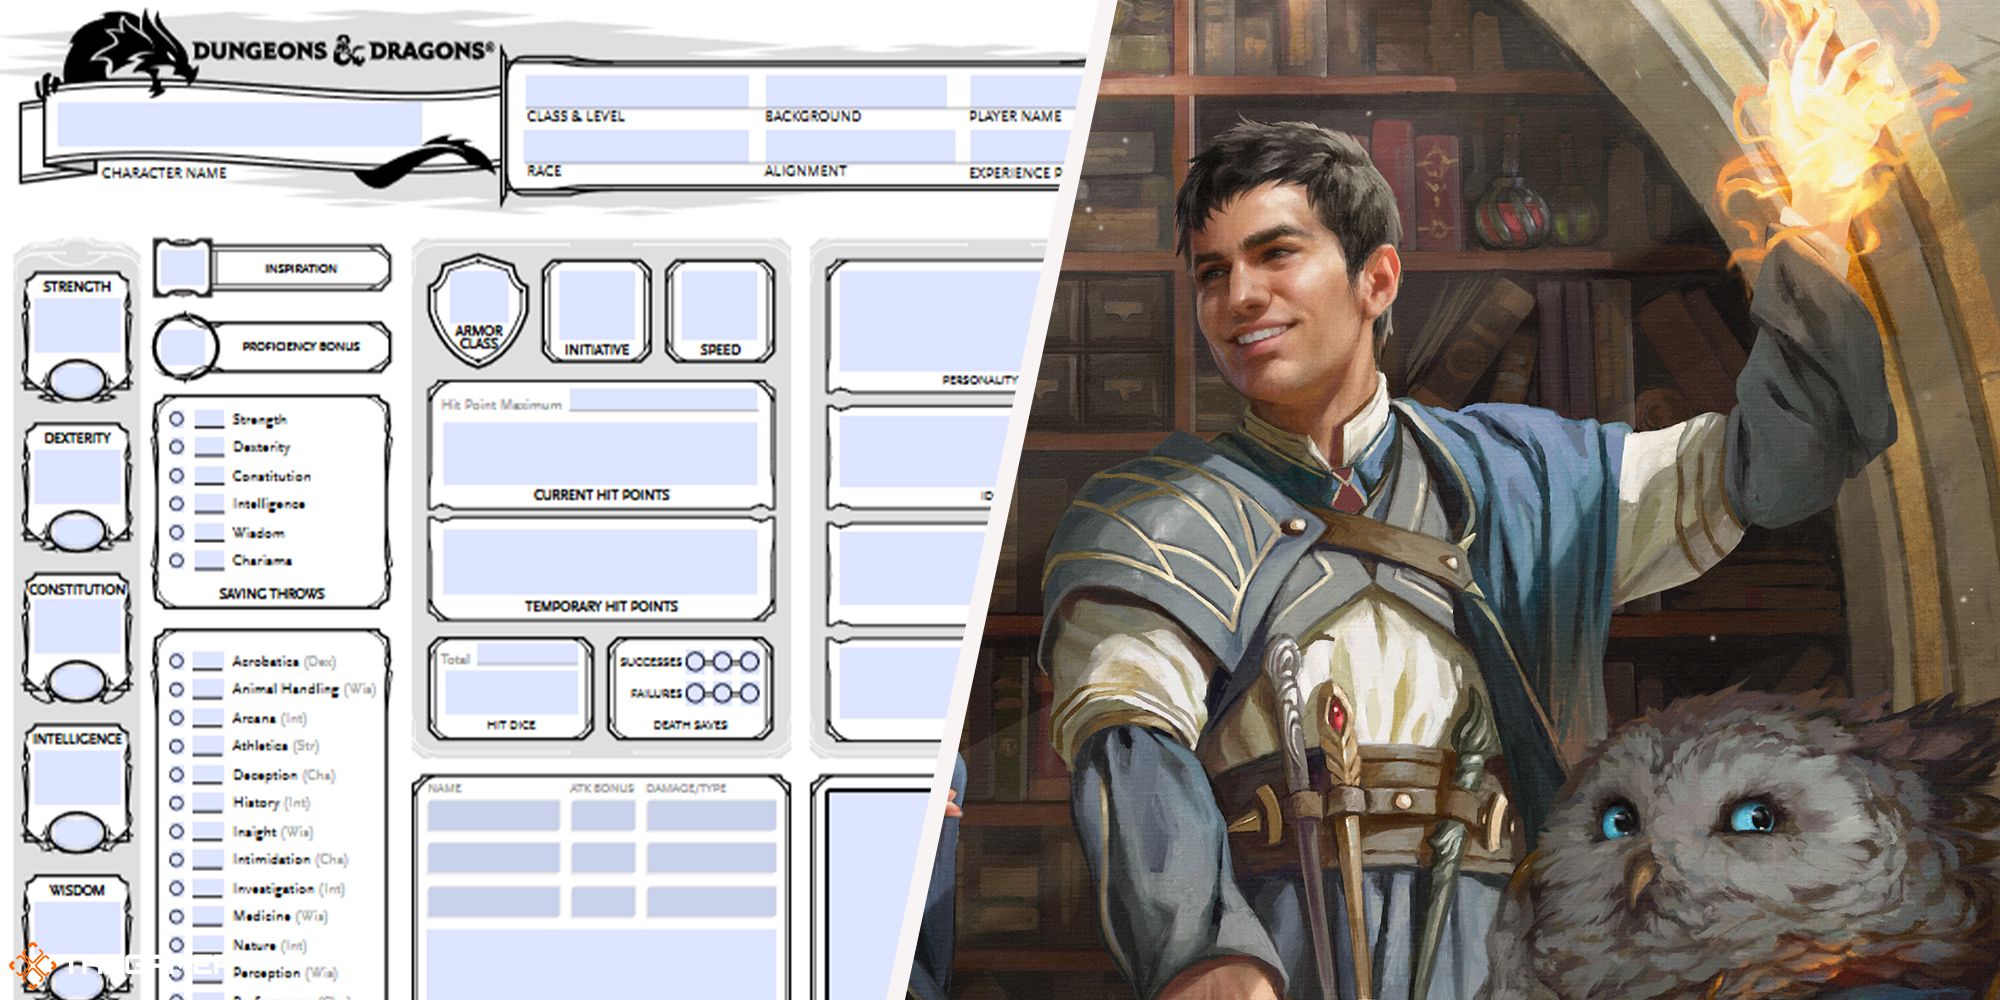 Dungeons and Dragons - character sheet on left, character art on right